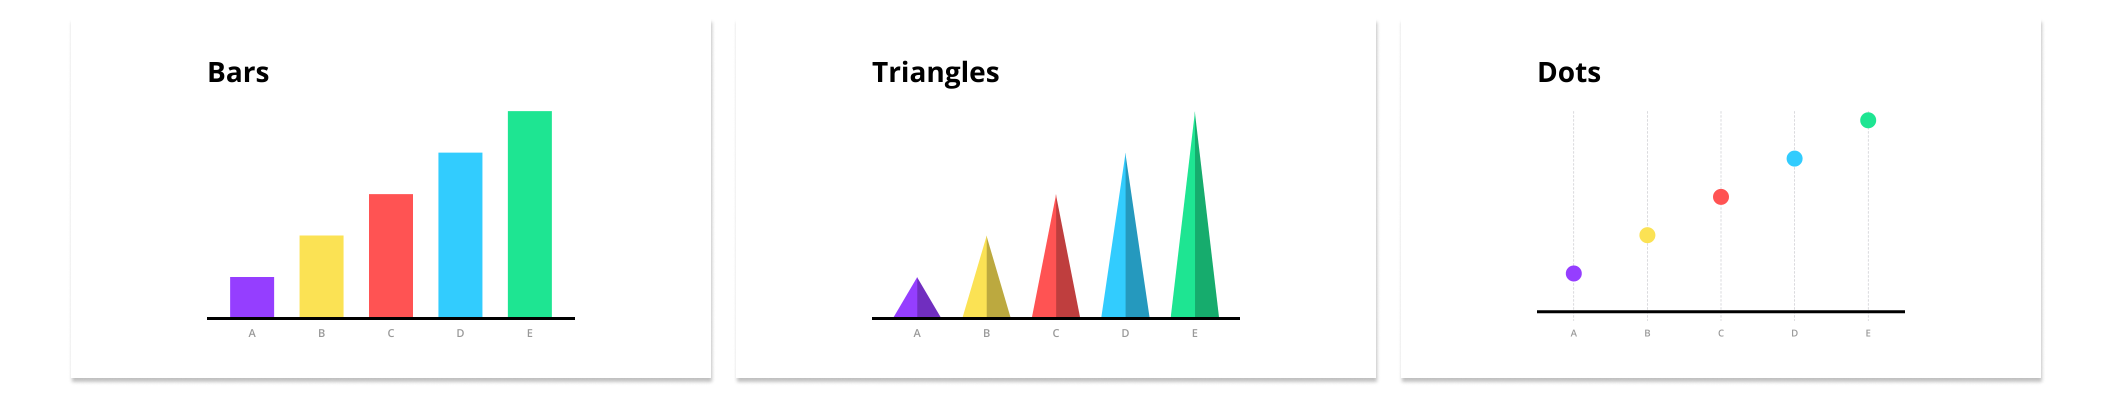 Numerical values shown as bars, triangles and dots.